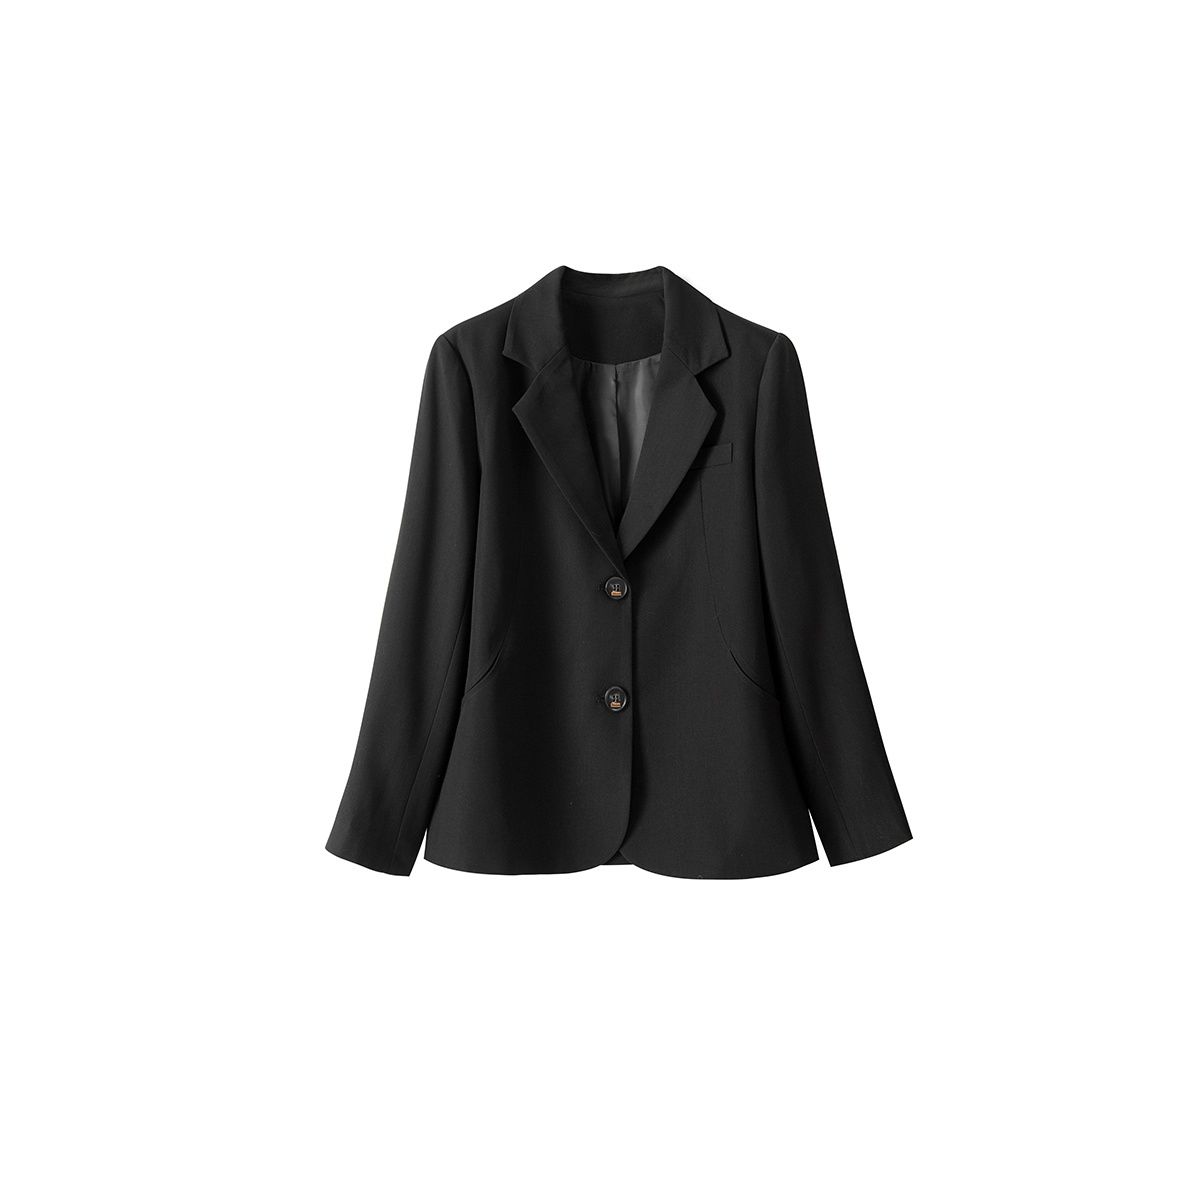 Version chao positive small chic pocket casual suit female small shoulder pads spring and autumn coat